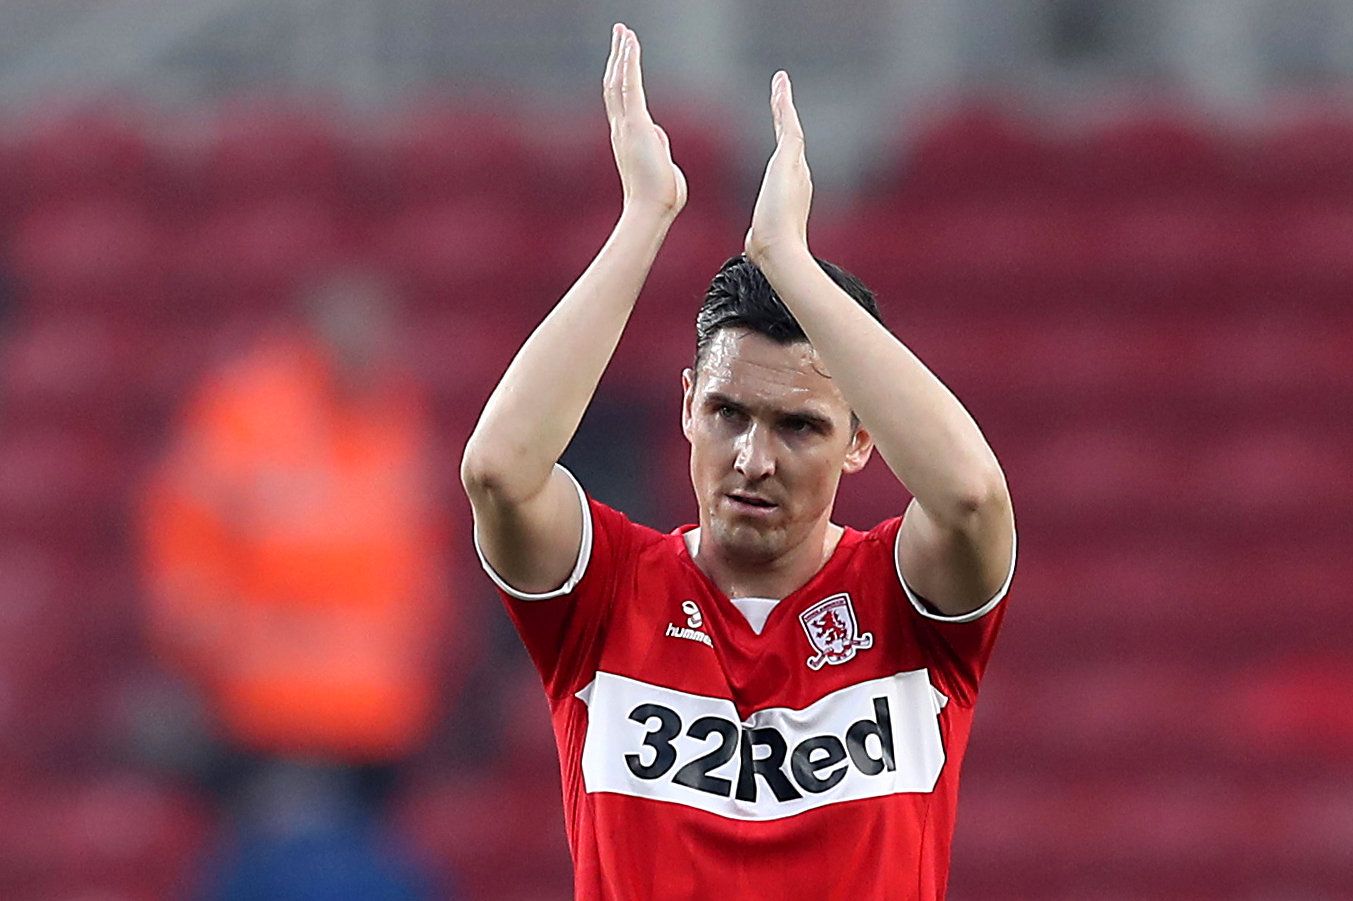 Soccer Football - Championship - Middlesbrough v Queens Park Rangers - Riverside Stadium, Middlesbrough, Britain - February 23, 2019   Middlesbrough's Stewart Downing applauds fans after the match   Action Images/John Clifton    EDITORIAL USE ONLY. No use with unauthorized audio, video, data, fixture lists, club/league logos or 